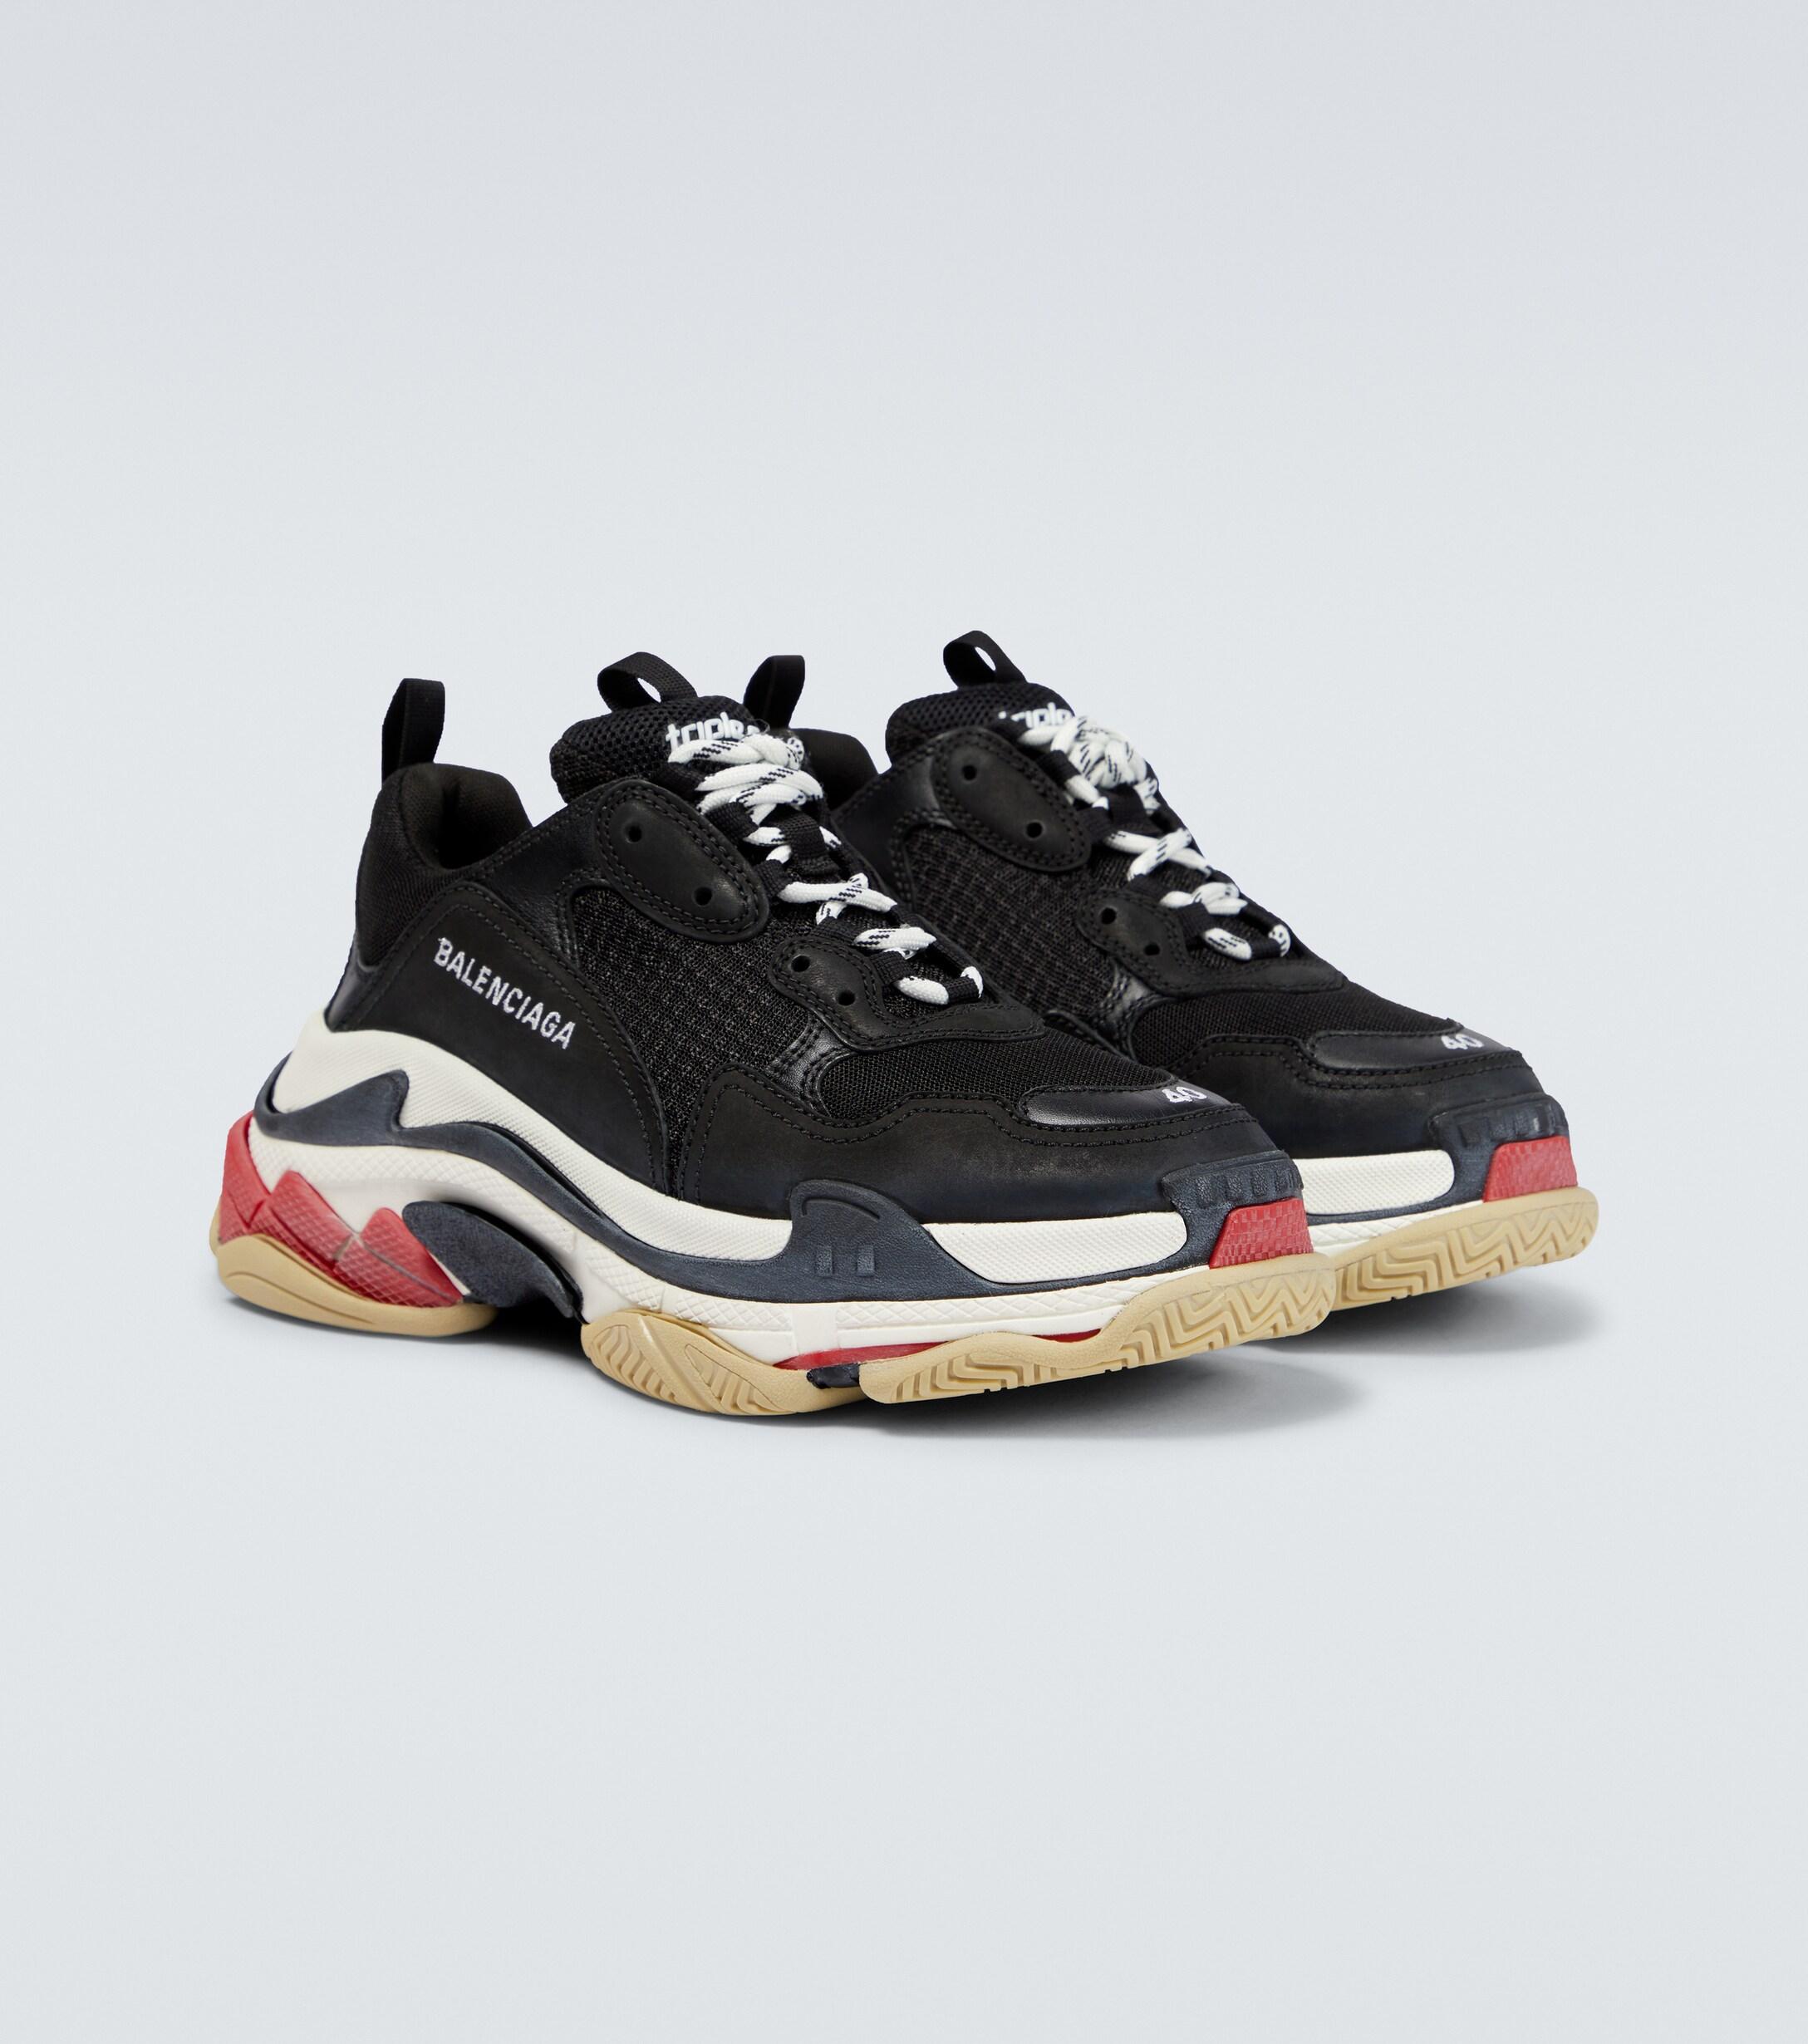 GOAT On X: The Balenciaga Triple S Features A, 41% OFF